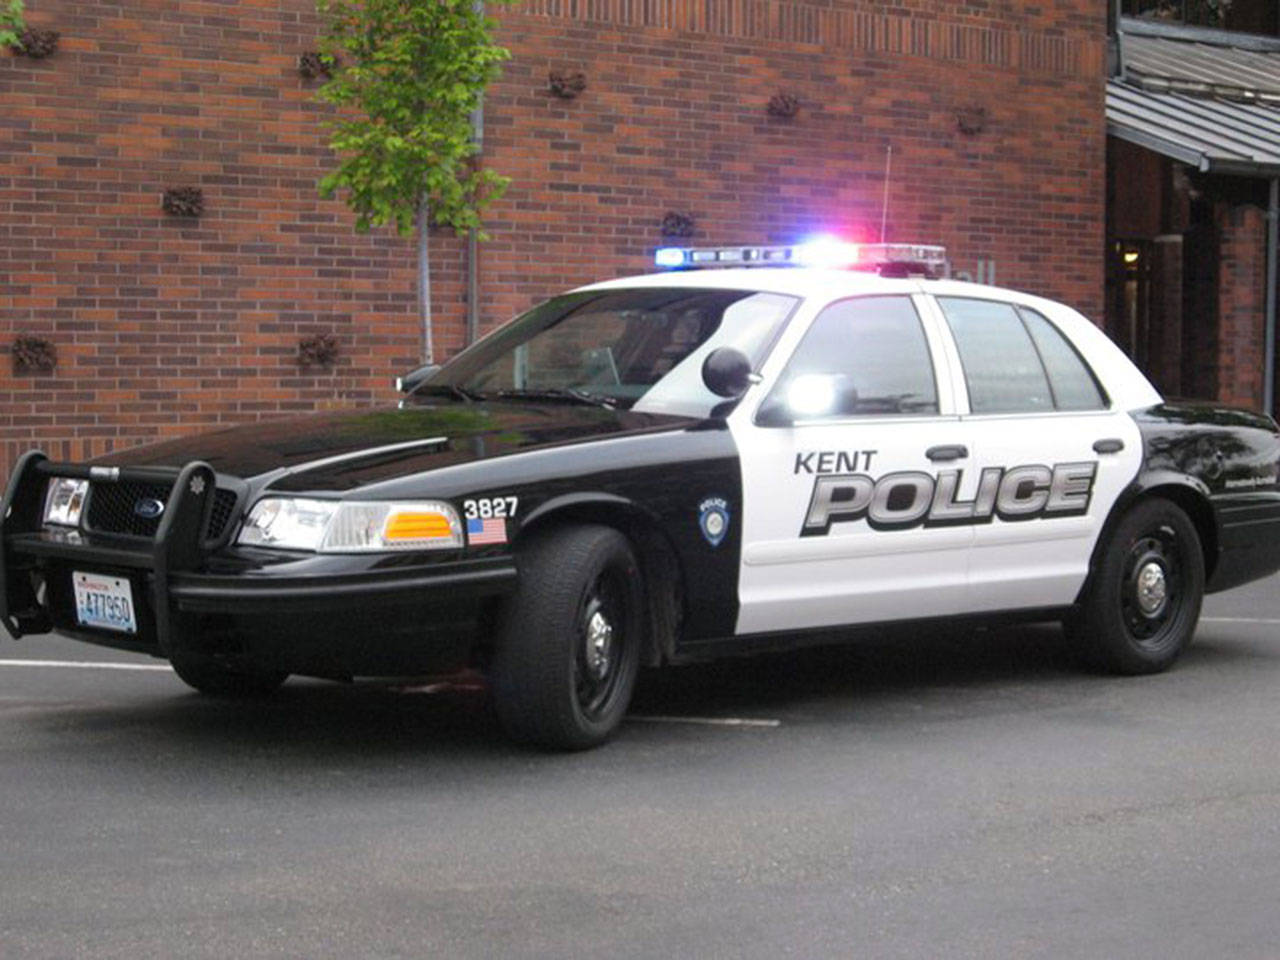 Kent officers bust man on Pacific Highway for picking up a prostitute |Police Blotter